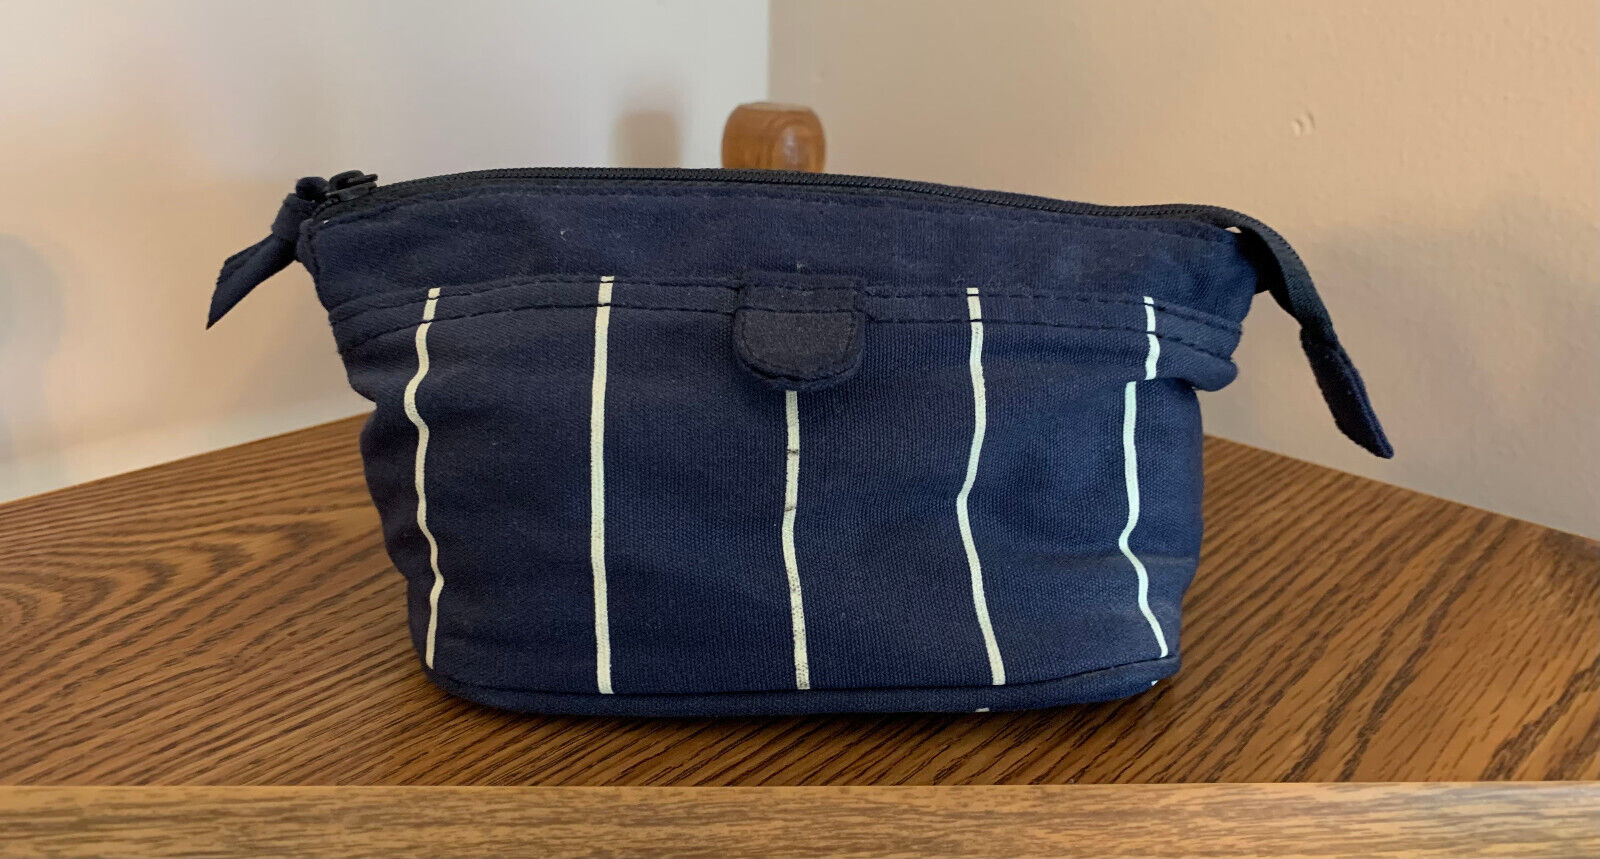 British Airways Business Class Amenity Kit from the 1990s - unused